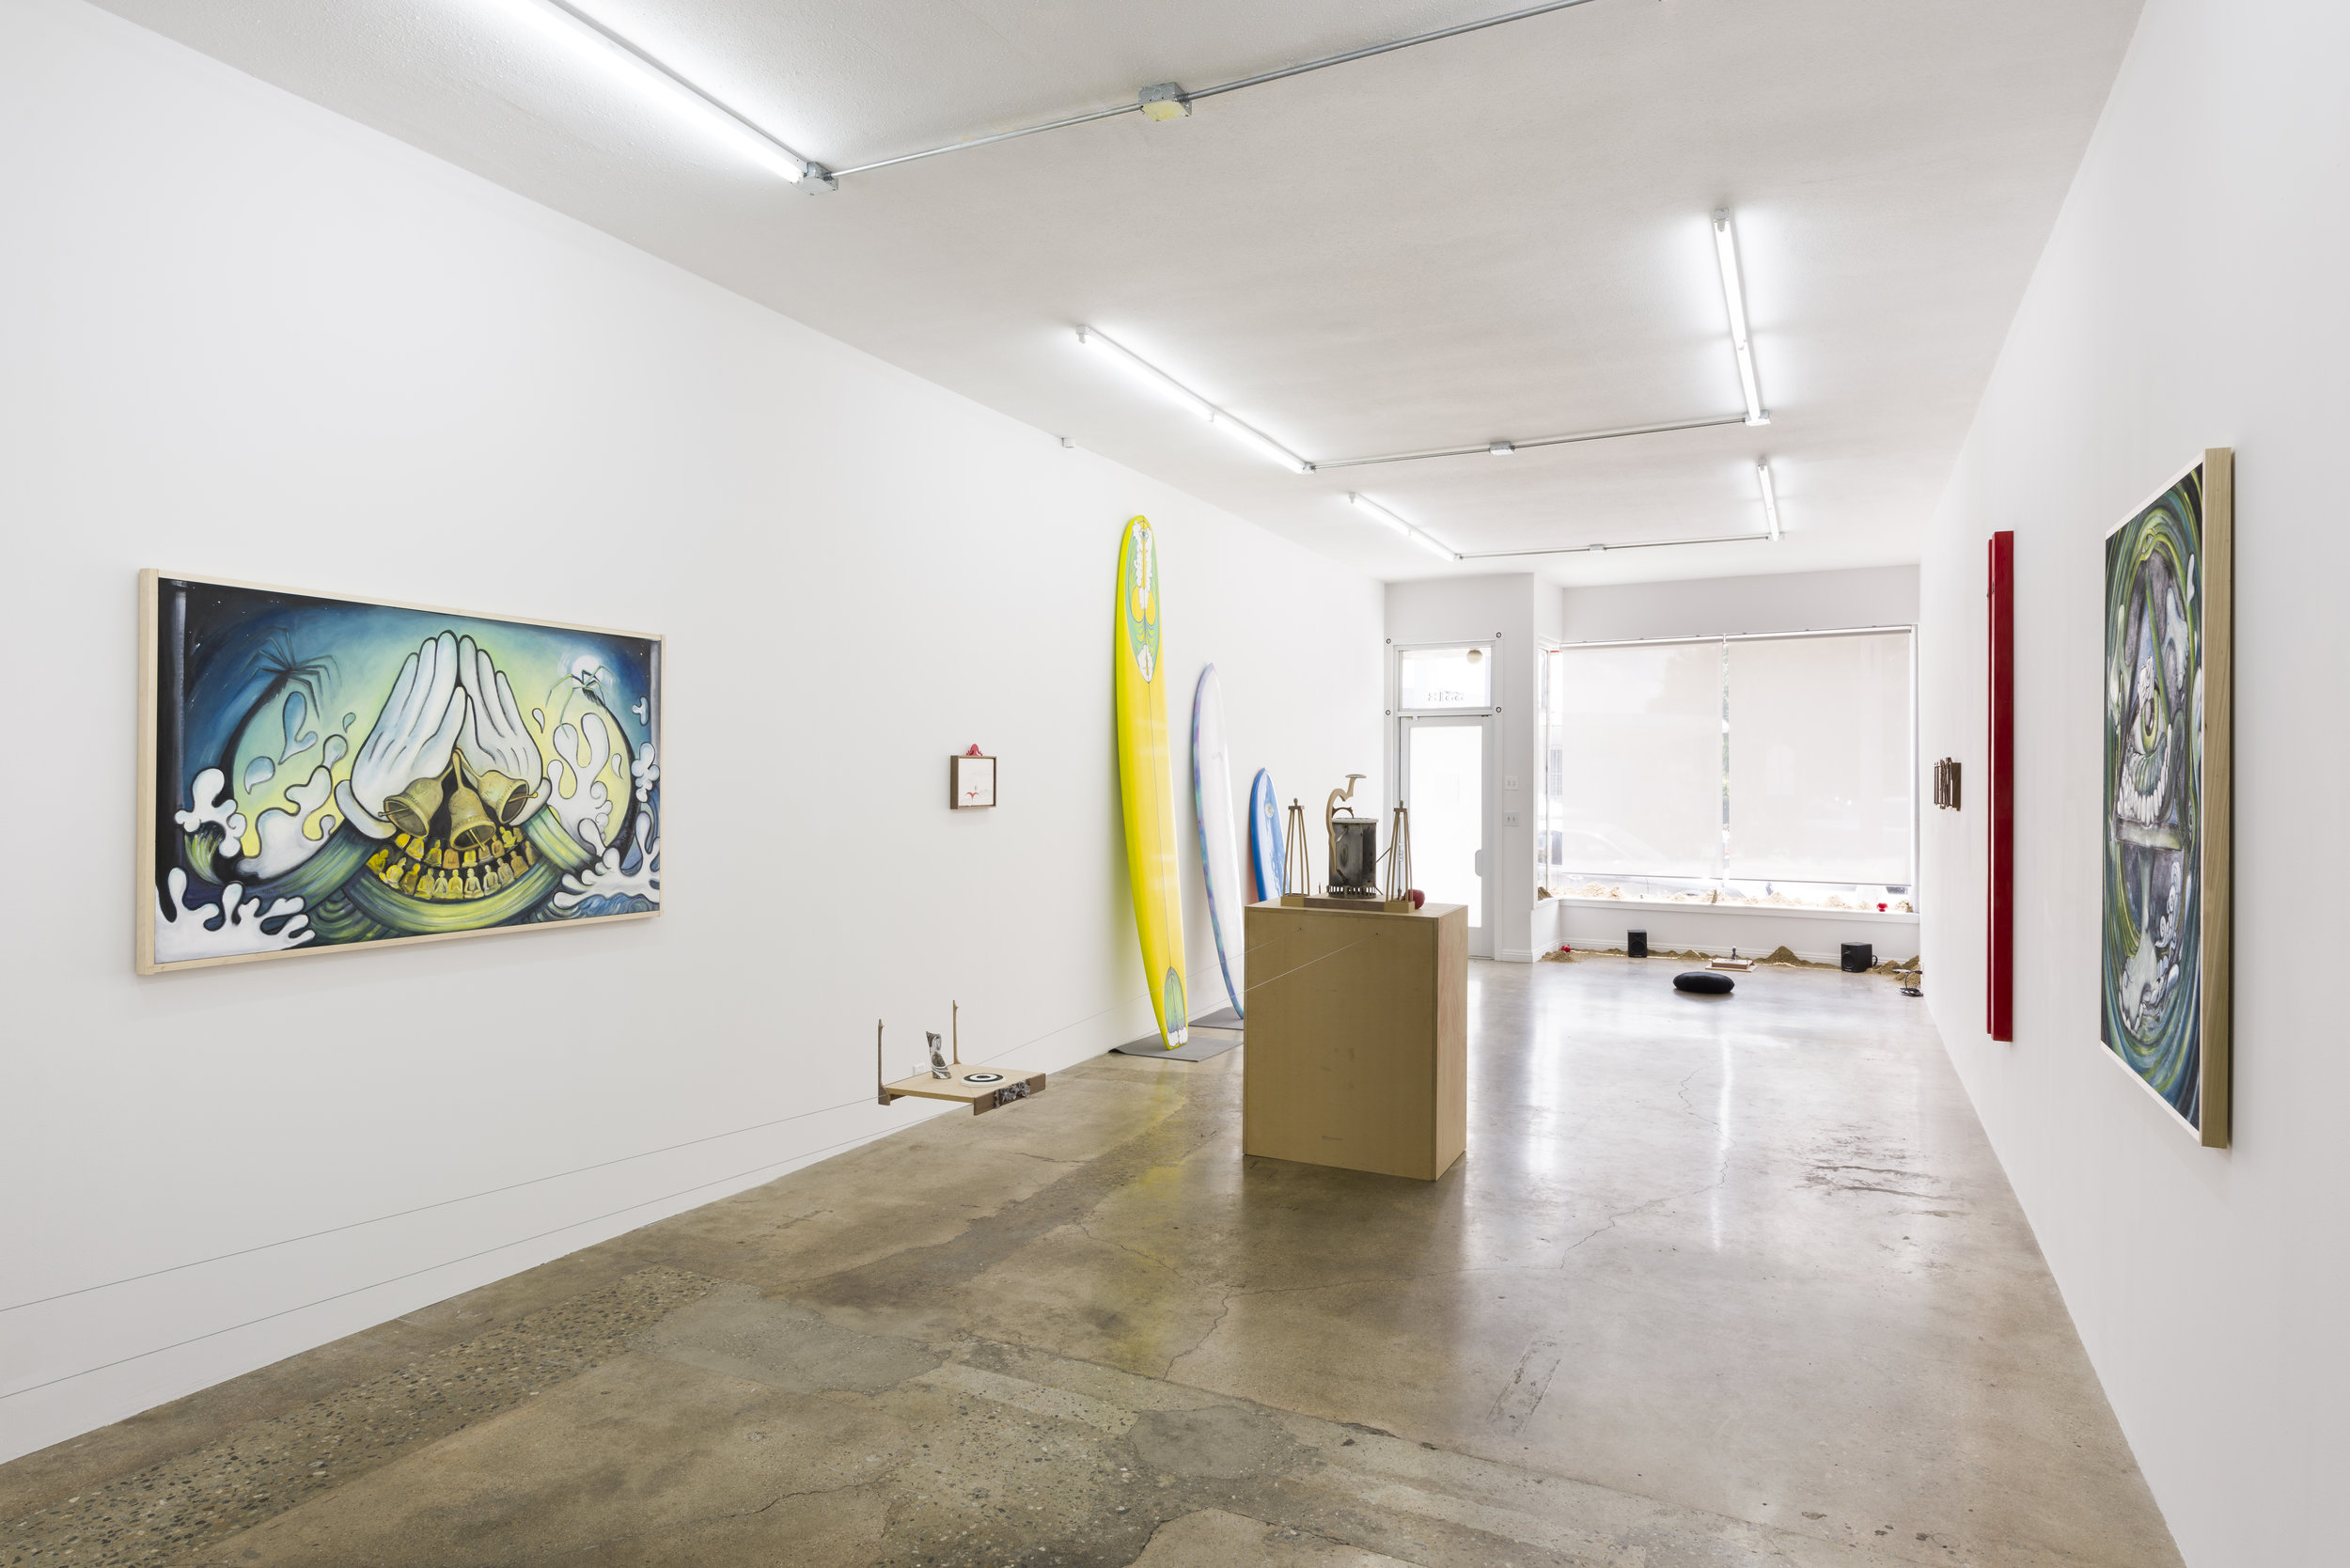  Installation view of  The Institute for Chaotic Love &amp; Healing  R. Lord, Harry Gould Harvey IV, DJ Richard  May 19 - June 30, 2019  Photo by Ruben Diaz   Link to press release.  